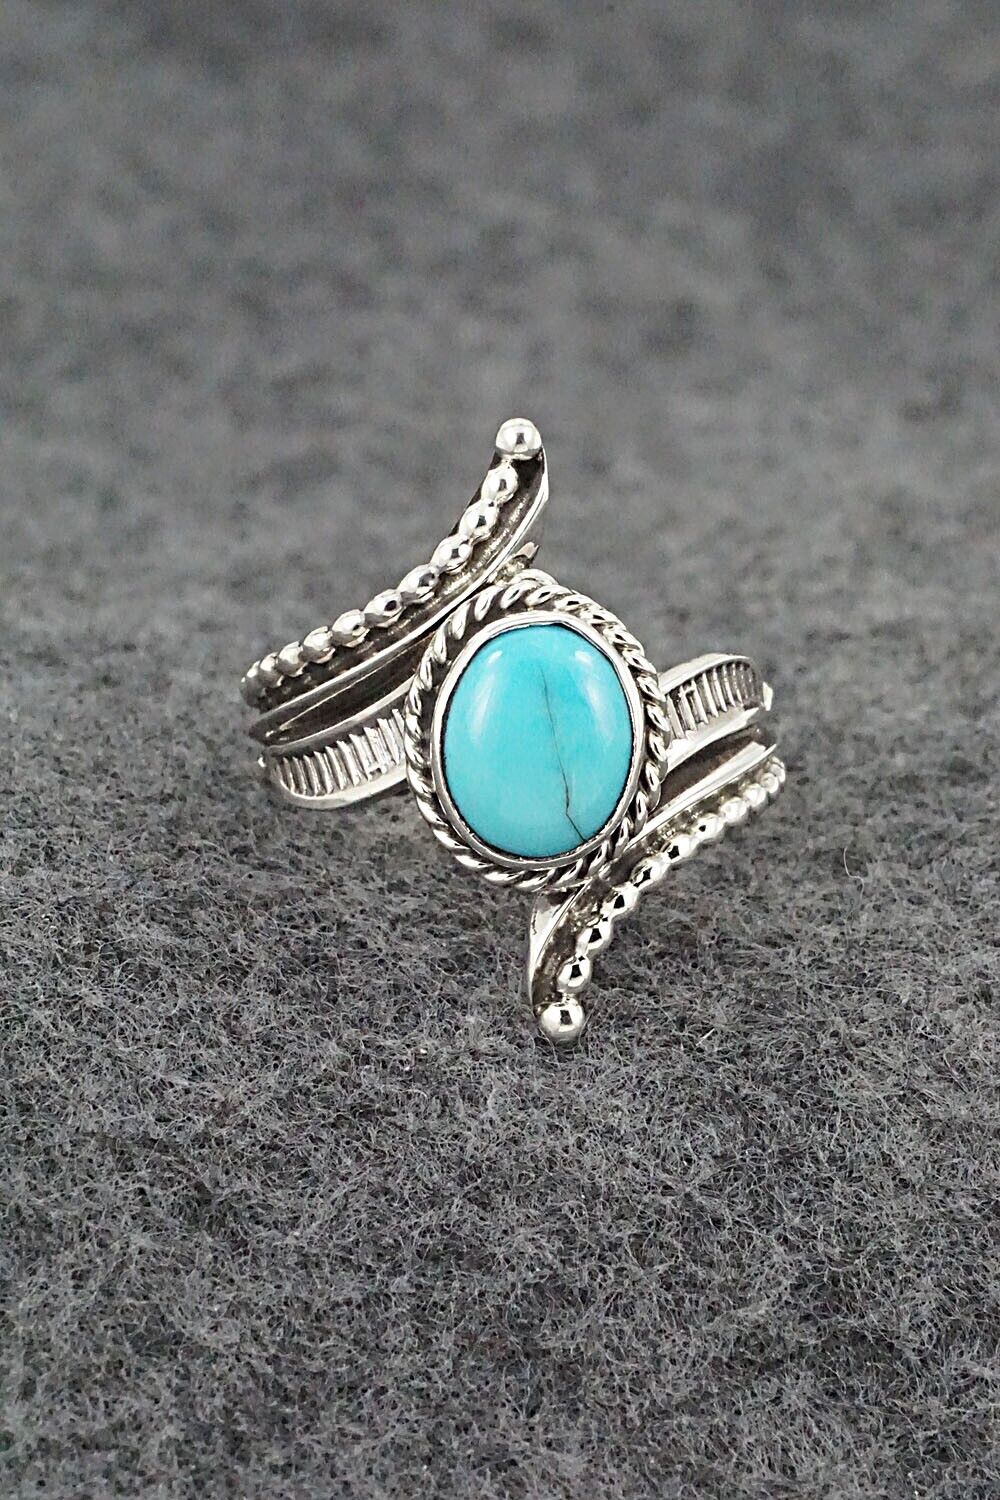 Turquoise & Sterling Silver Ring - Thomas Yazzie - Size 7.5